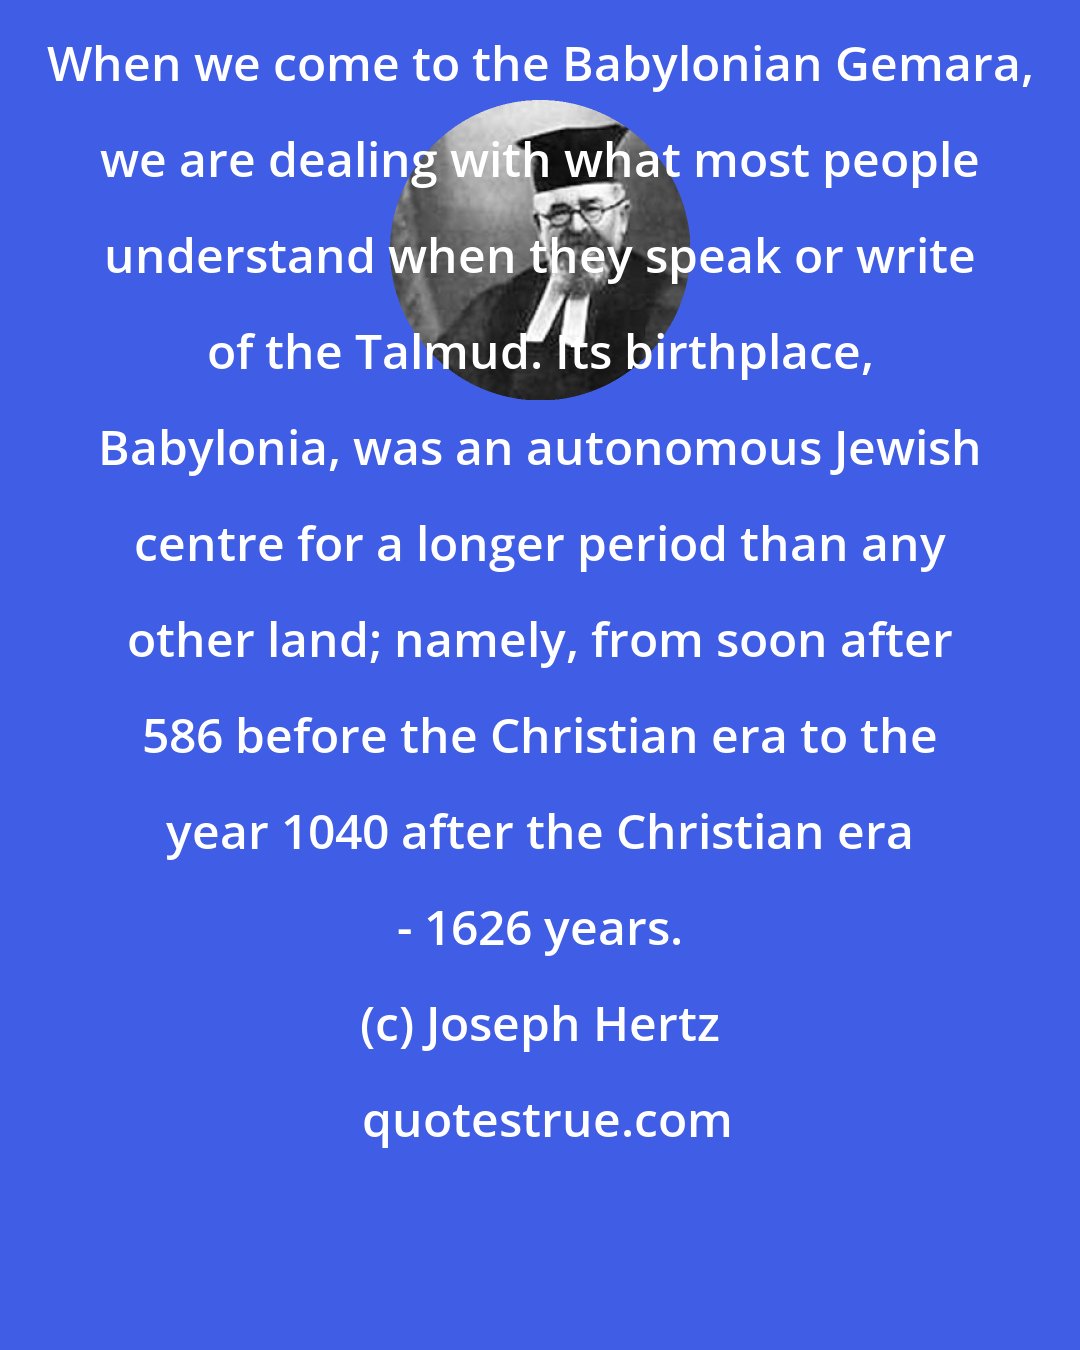 Joseph Hertz: When we come to the Babylonian Gemara, we are dealing with what most people understand when they speak or write of the Talmud. Its birthplace, Babylonia, was an autonomous Jewish centre for a longer period than any other land; namely, from soon after 586 before the Christian era to the year 1040 after the Christian era - 1626 years.